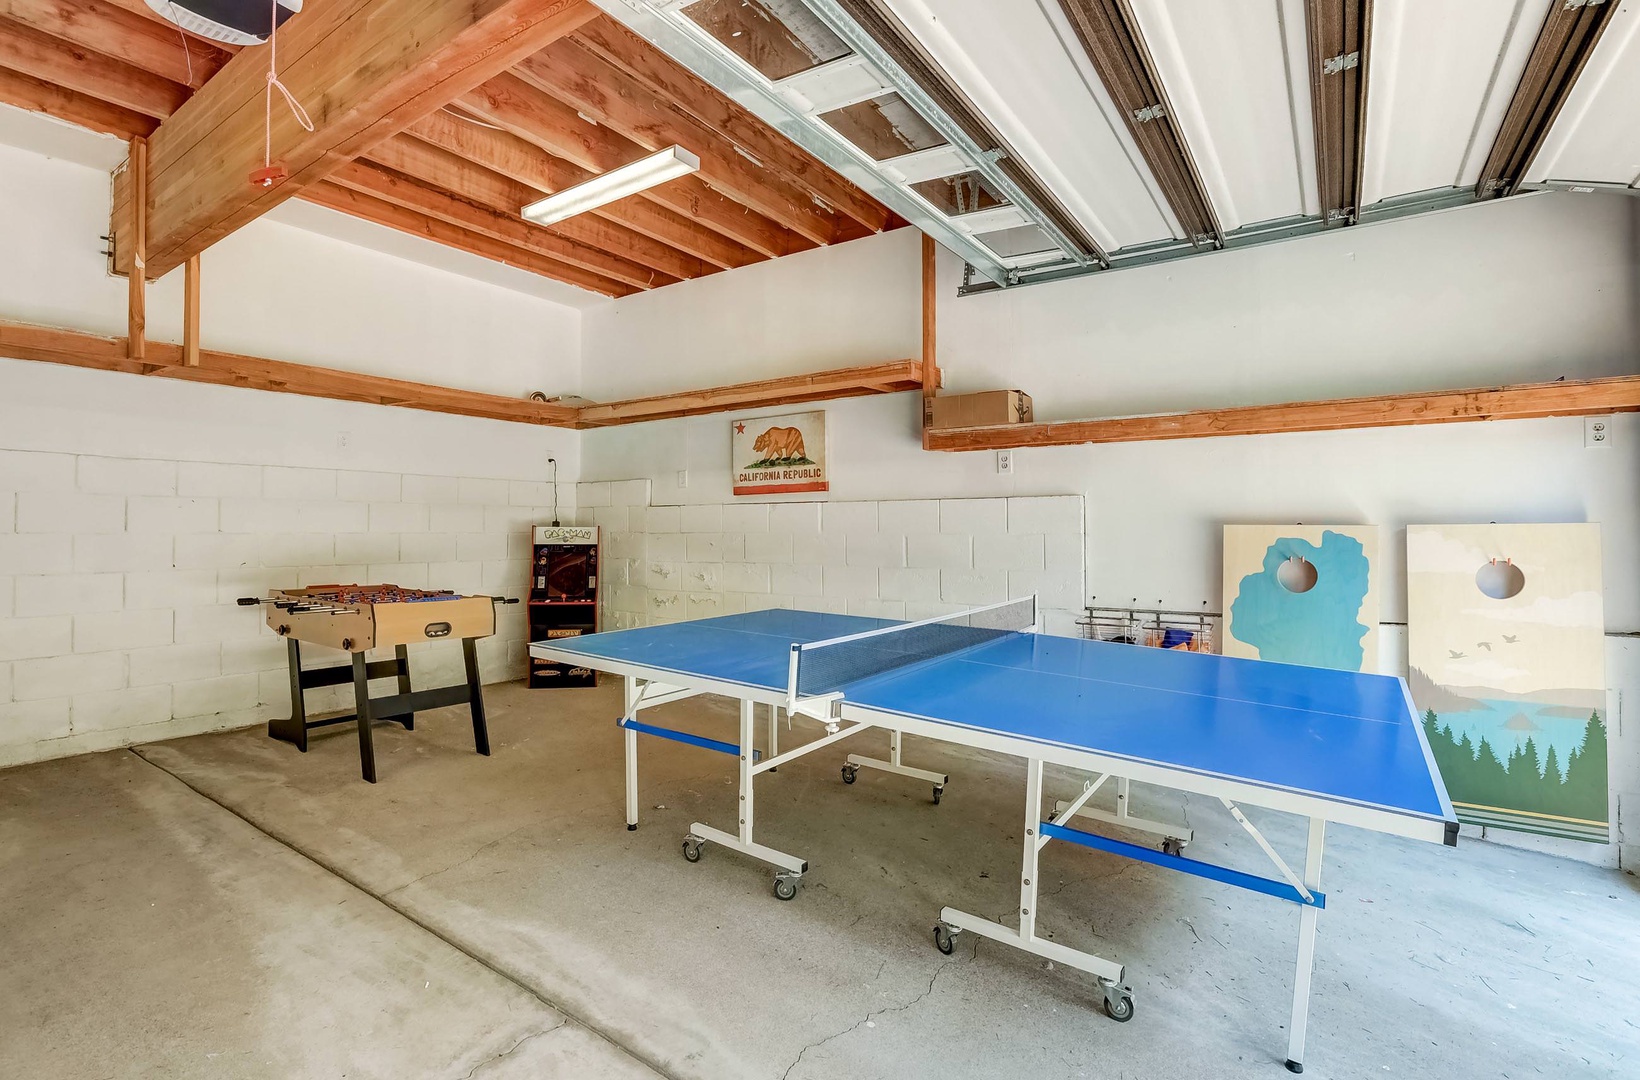 Game room with ping pong table, foosball table